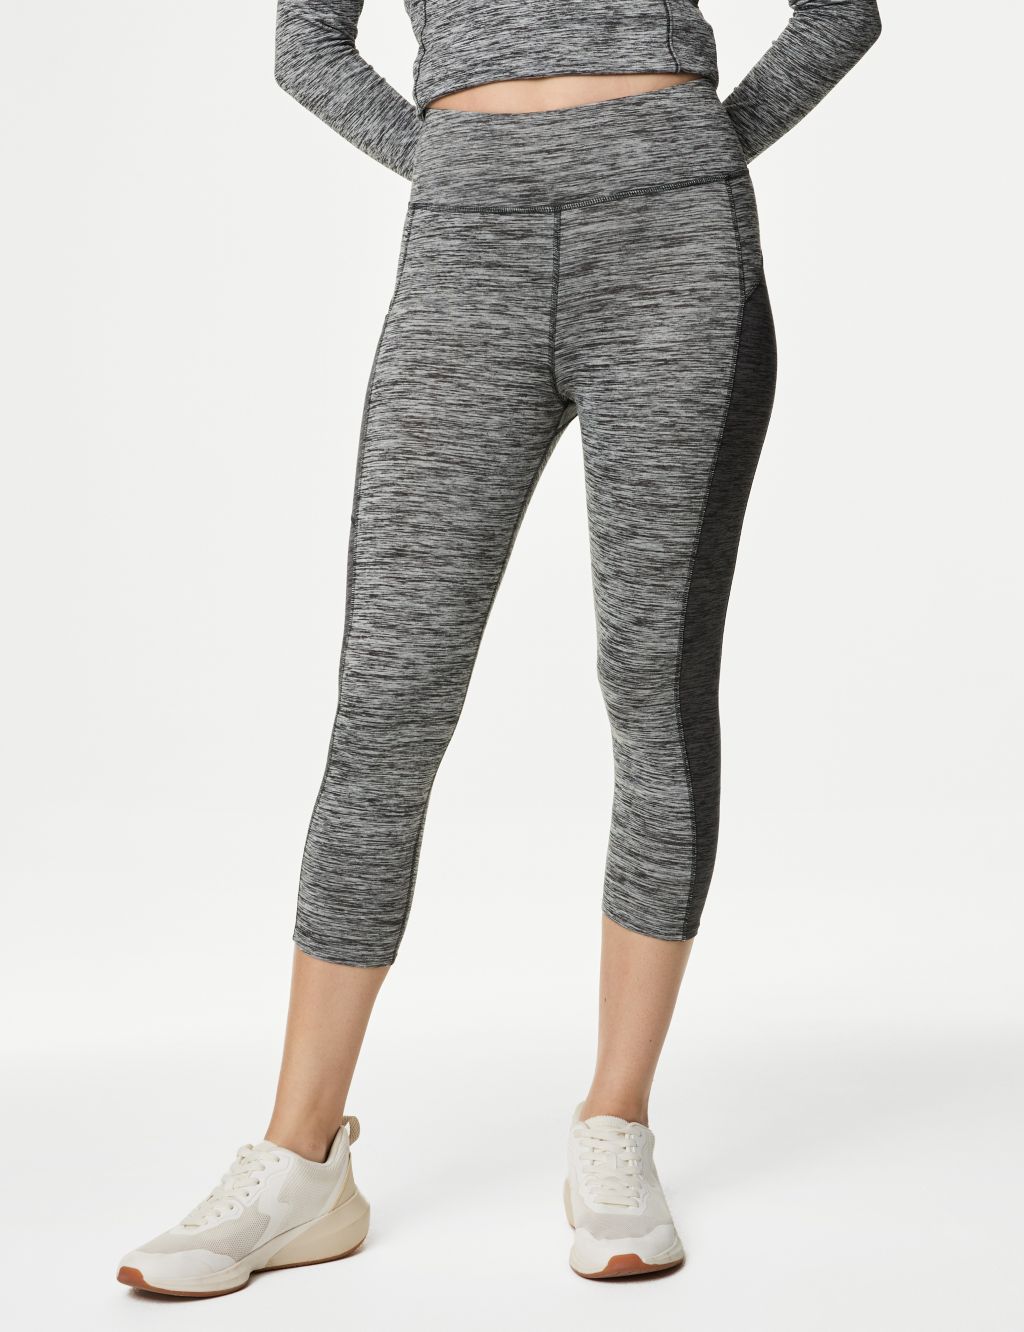 Go Move High Waisted Cropped Gym Leggings image 3